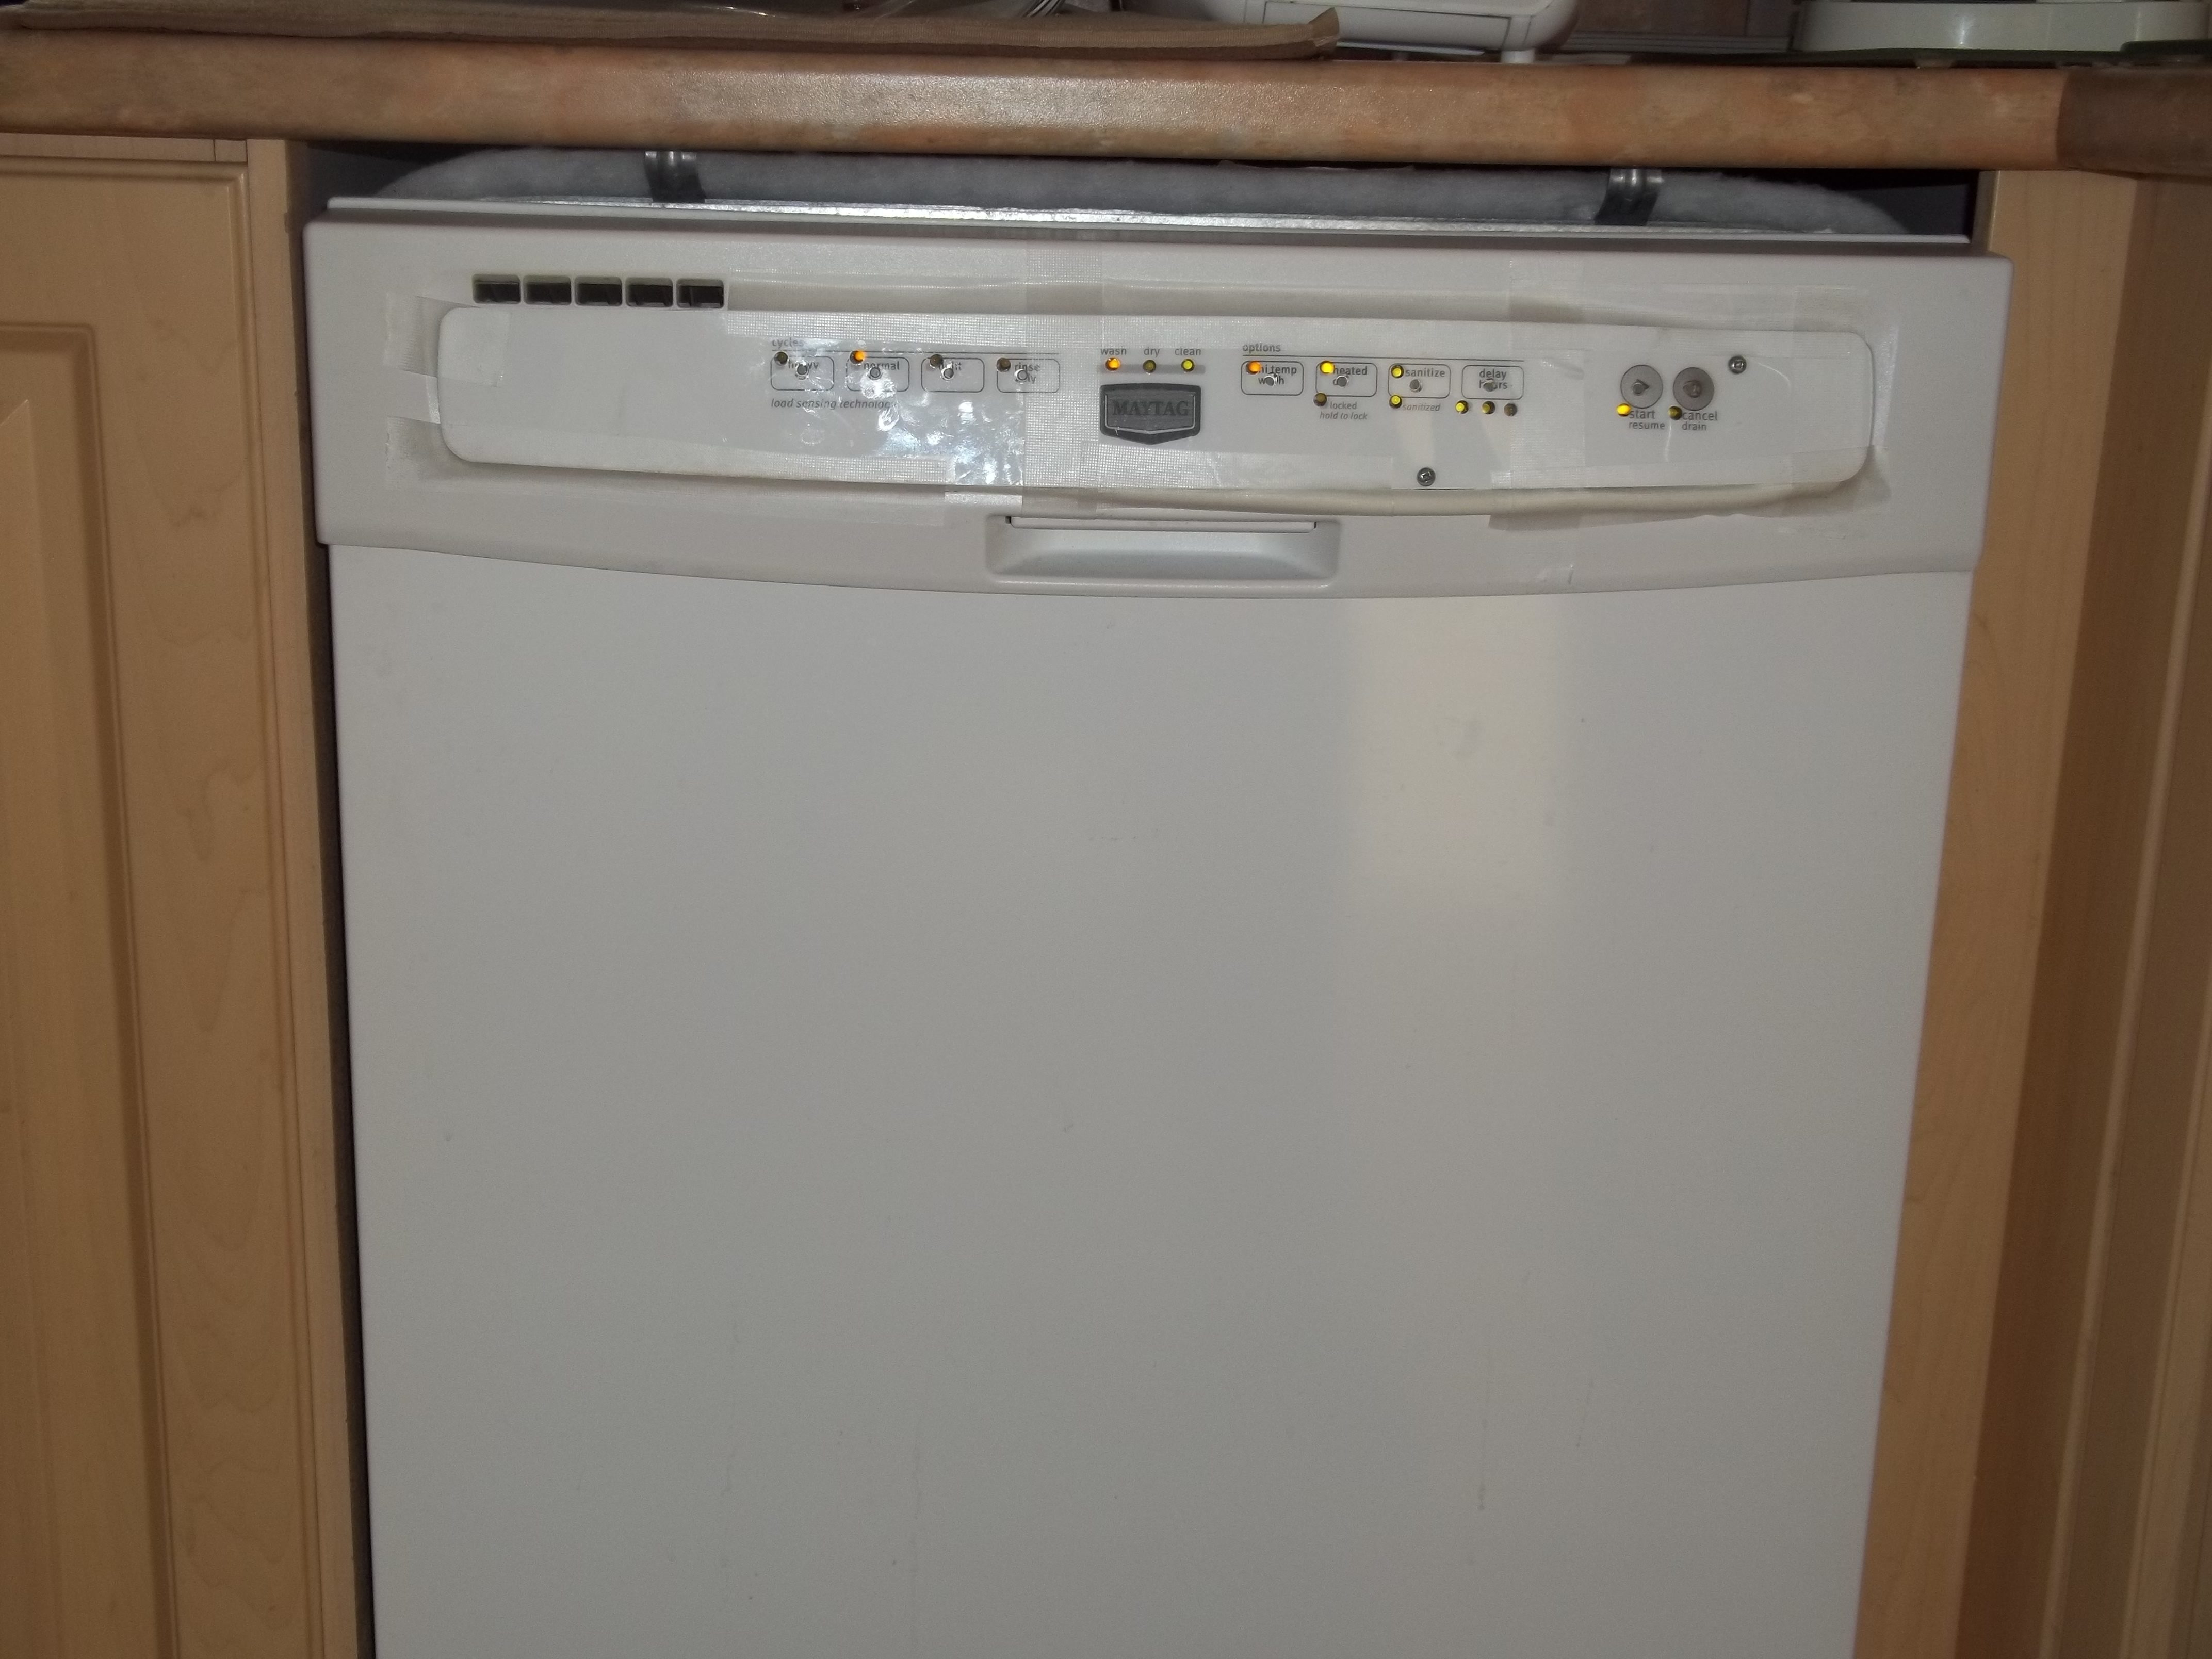 Where can you find reviews of the Maytag Quiet Series 200 dishwasher?